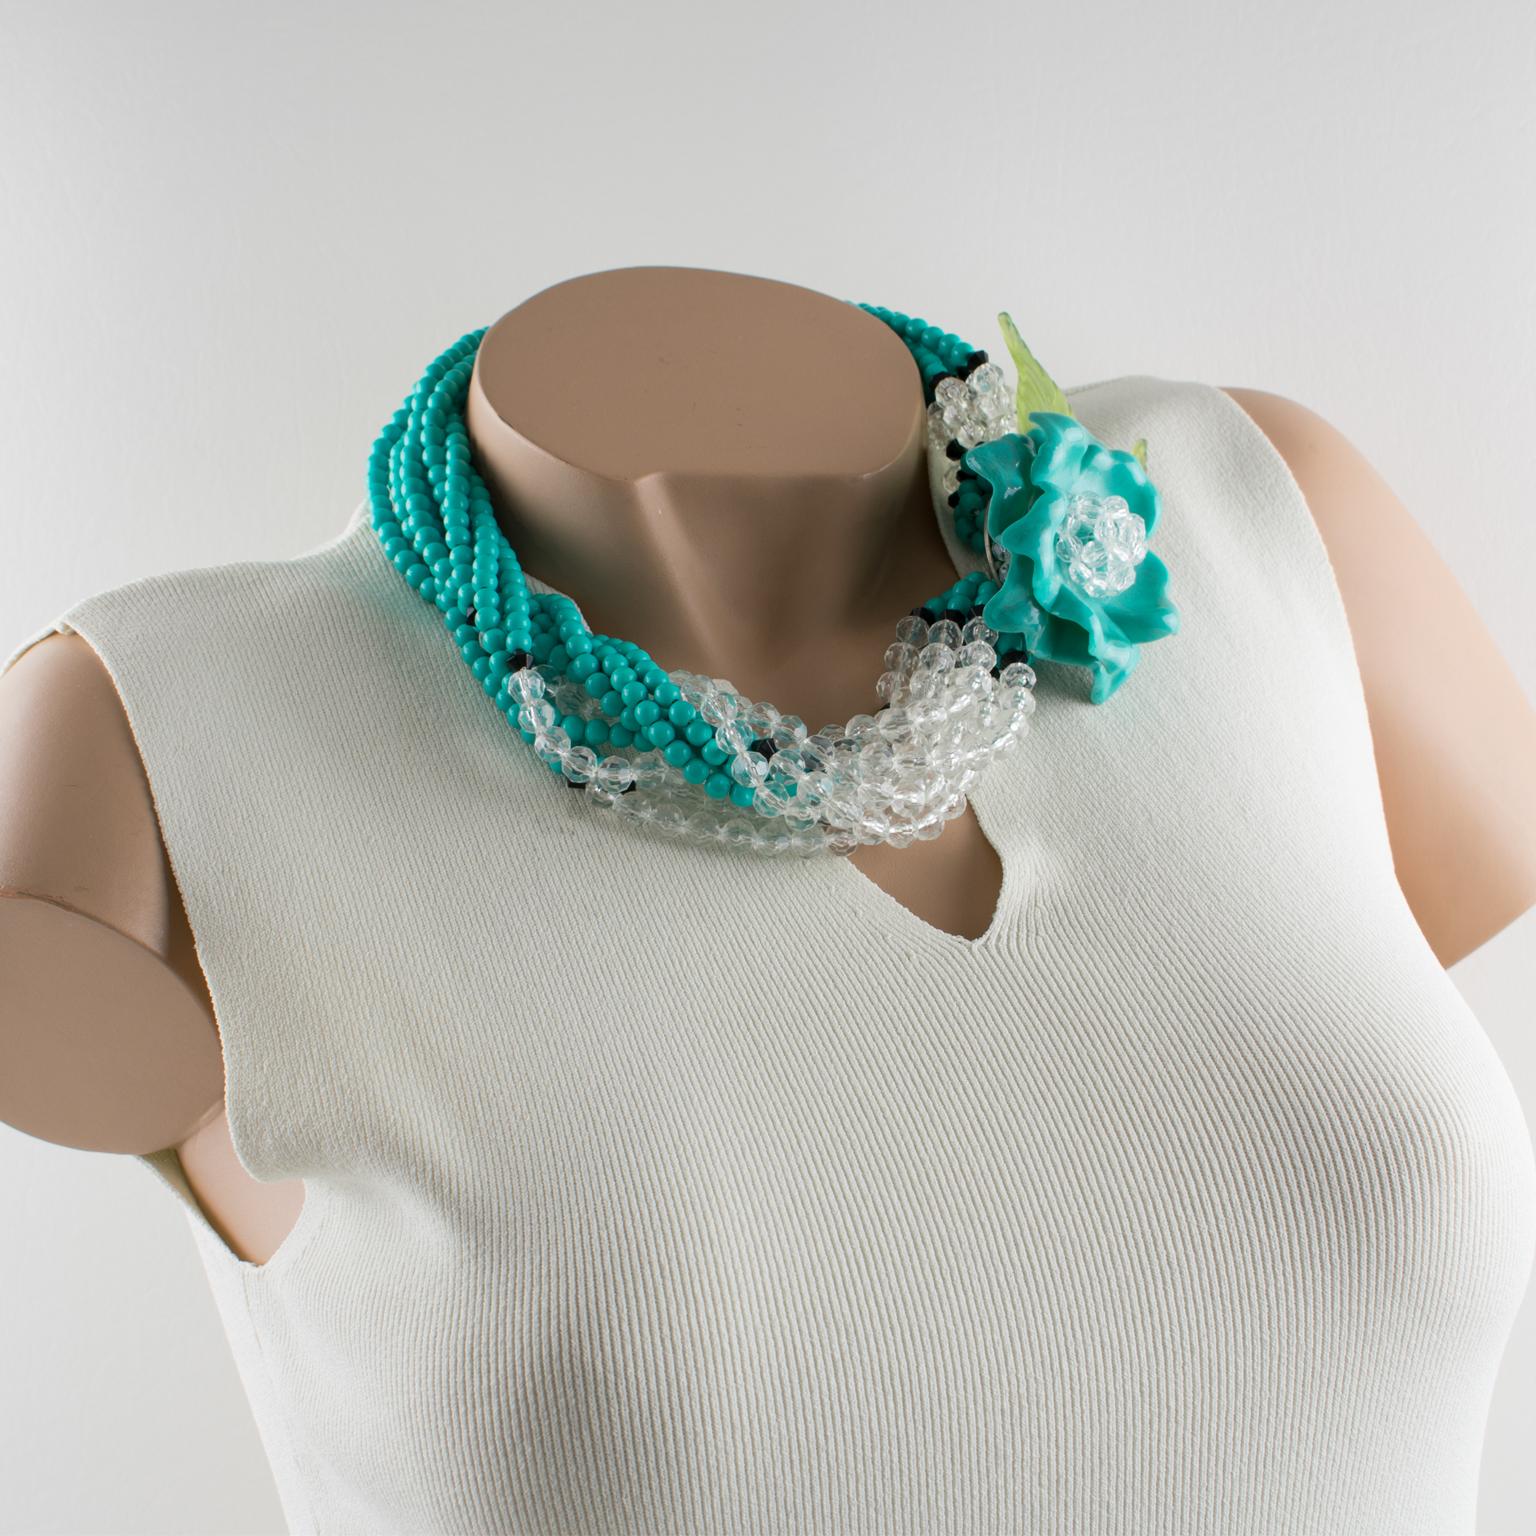 Lovely Angela Caputi, made in Italy beaded necklace. Large multi-strand resin beads with an oversized dimensional flower pendant on the side. Assorted colors of turquoise blue, black, transparent, and light green. Multi-strand of tiny turquoise-blue